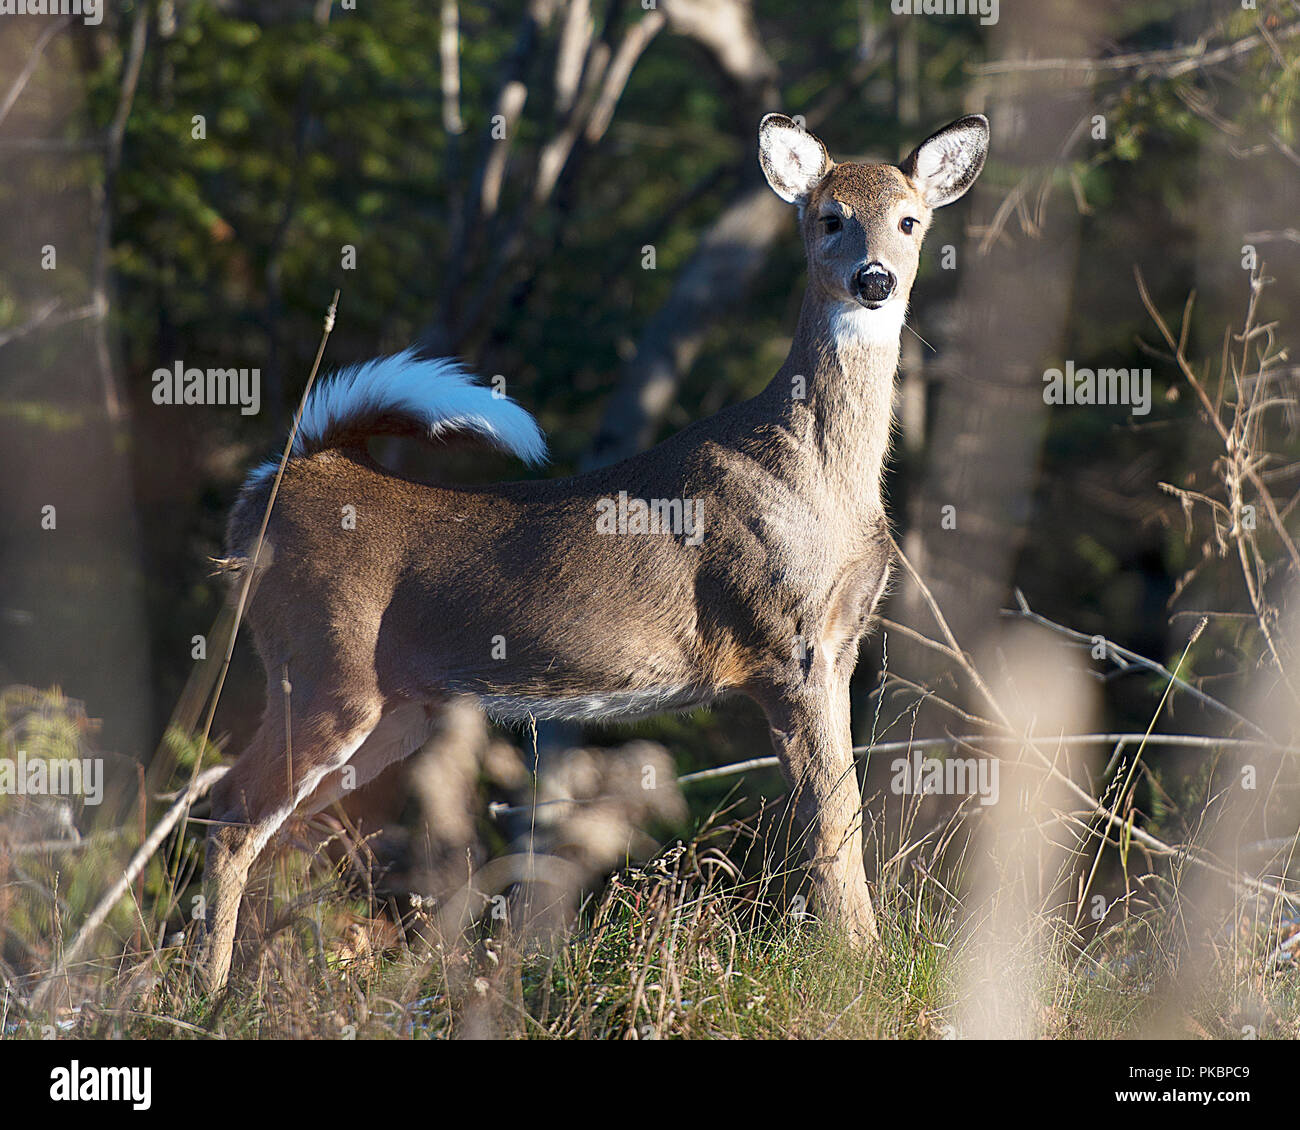 Deer animal close-up view in the forest displaying body, head, ears, eyes, nose, white tail  in its environment and surrounding with a bokeh foliage b Stock Photo